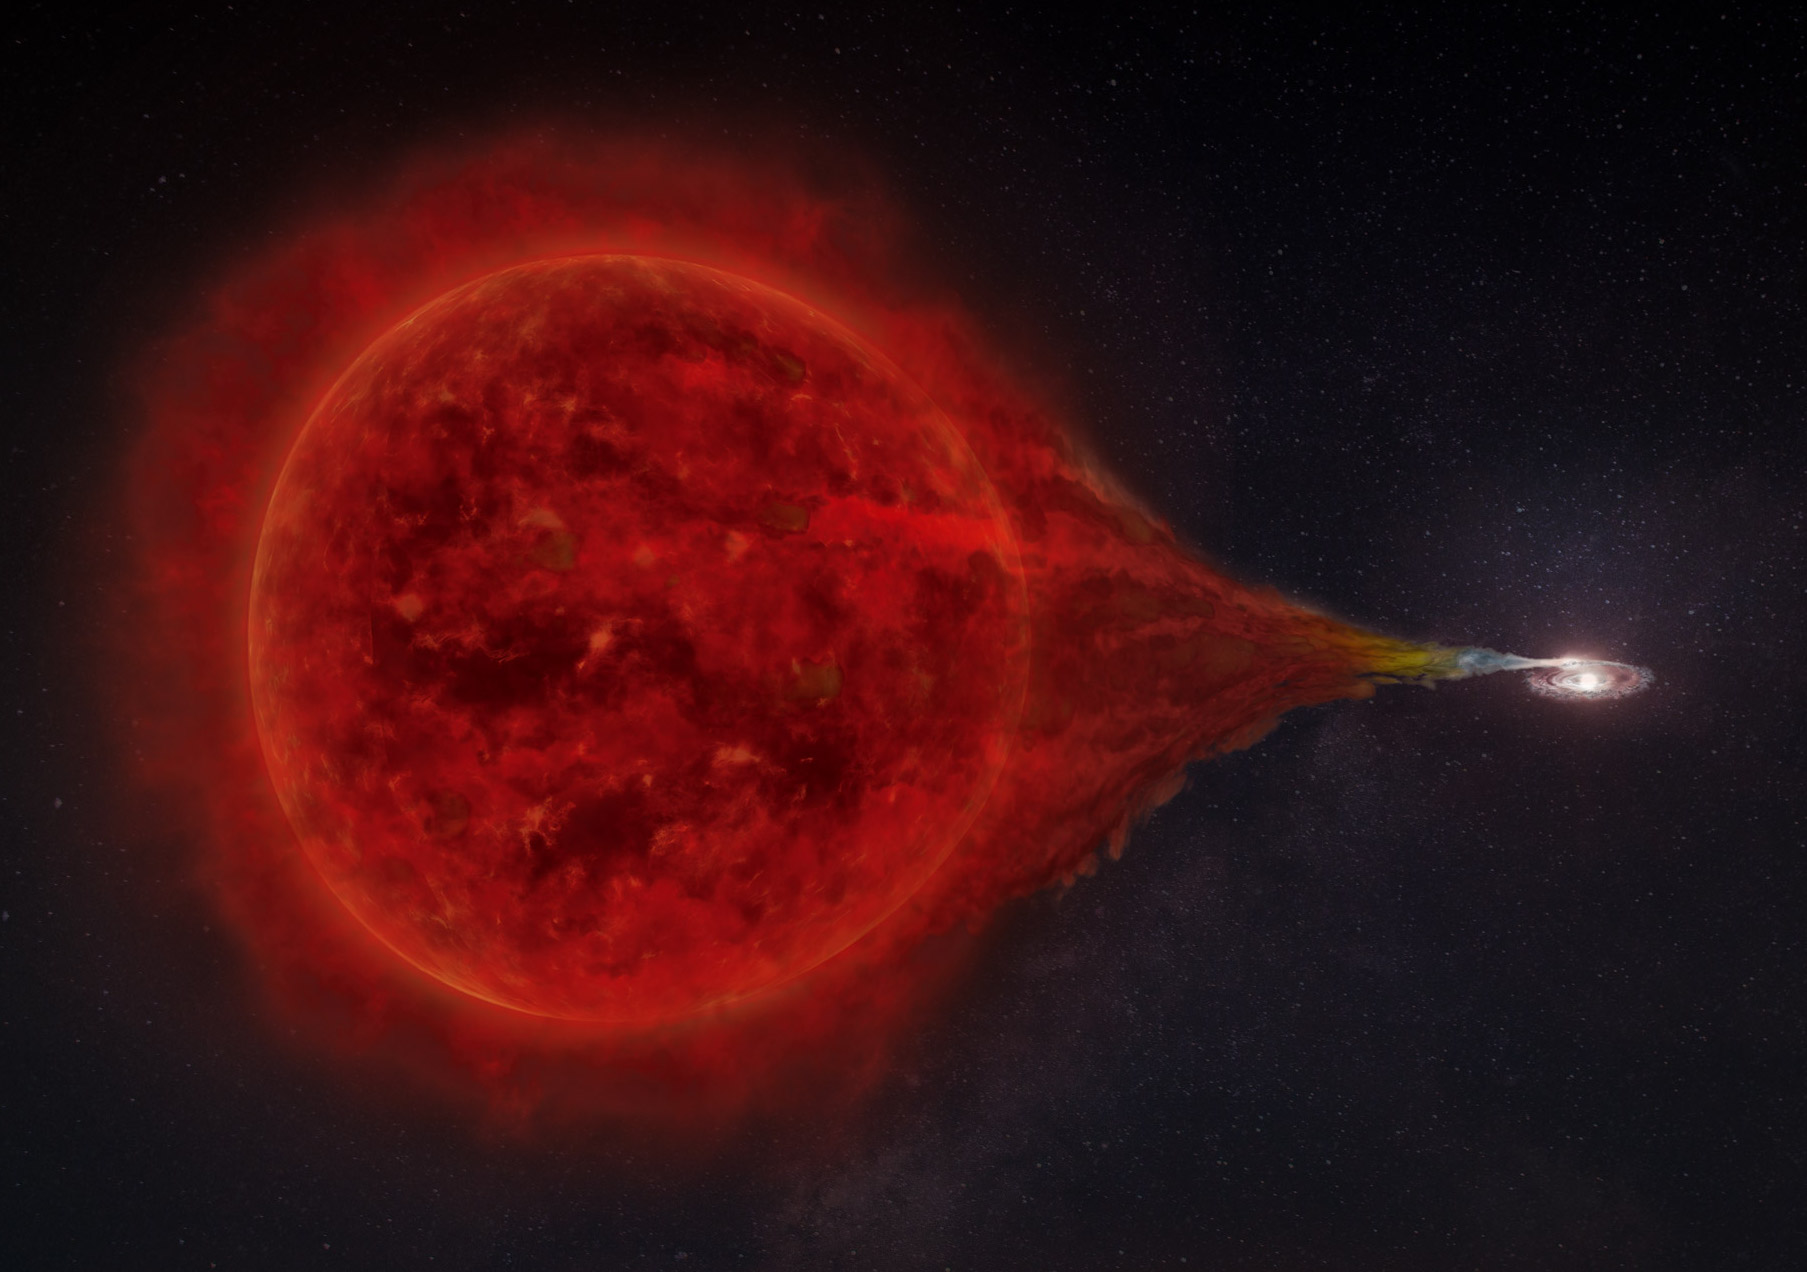 MAGIC detects the nuclear explosion of a 'vampire' star